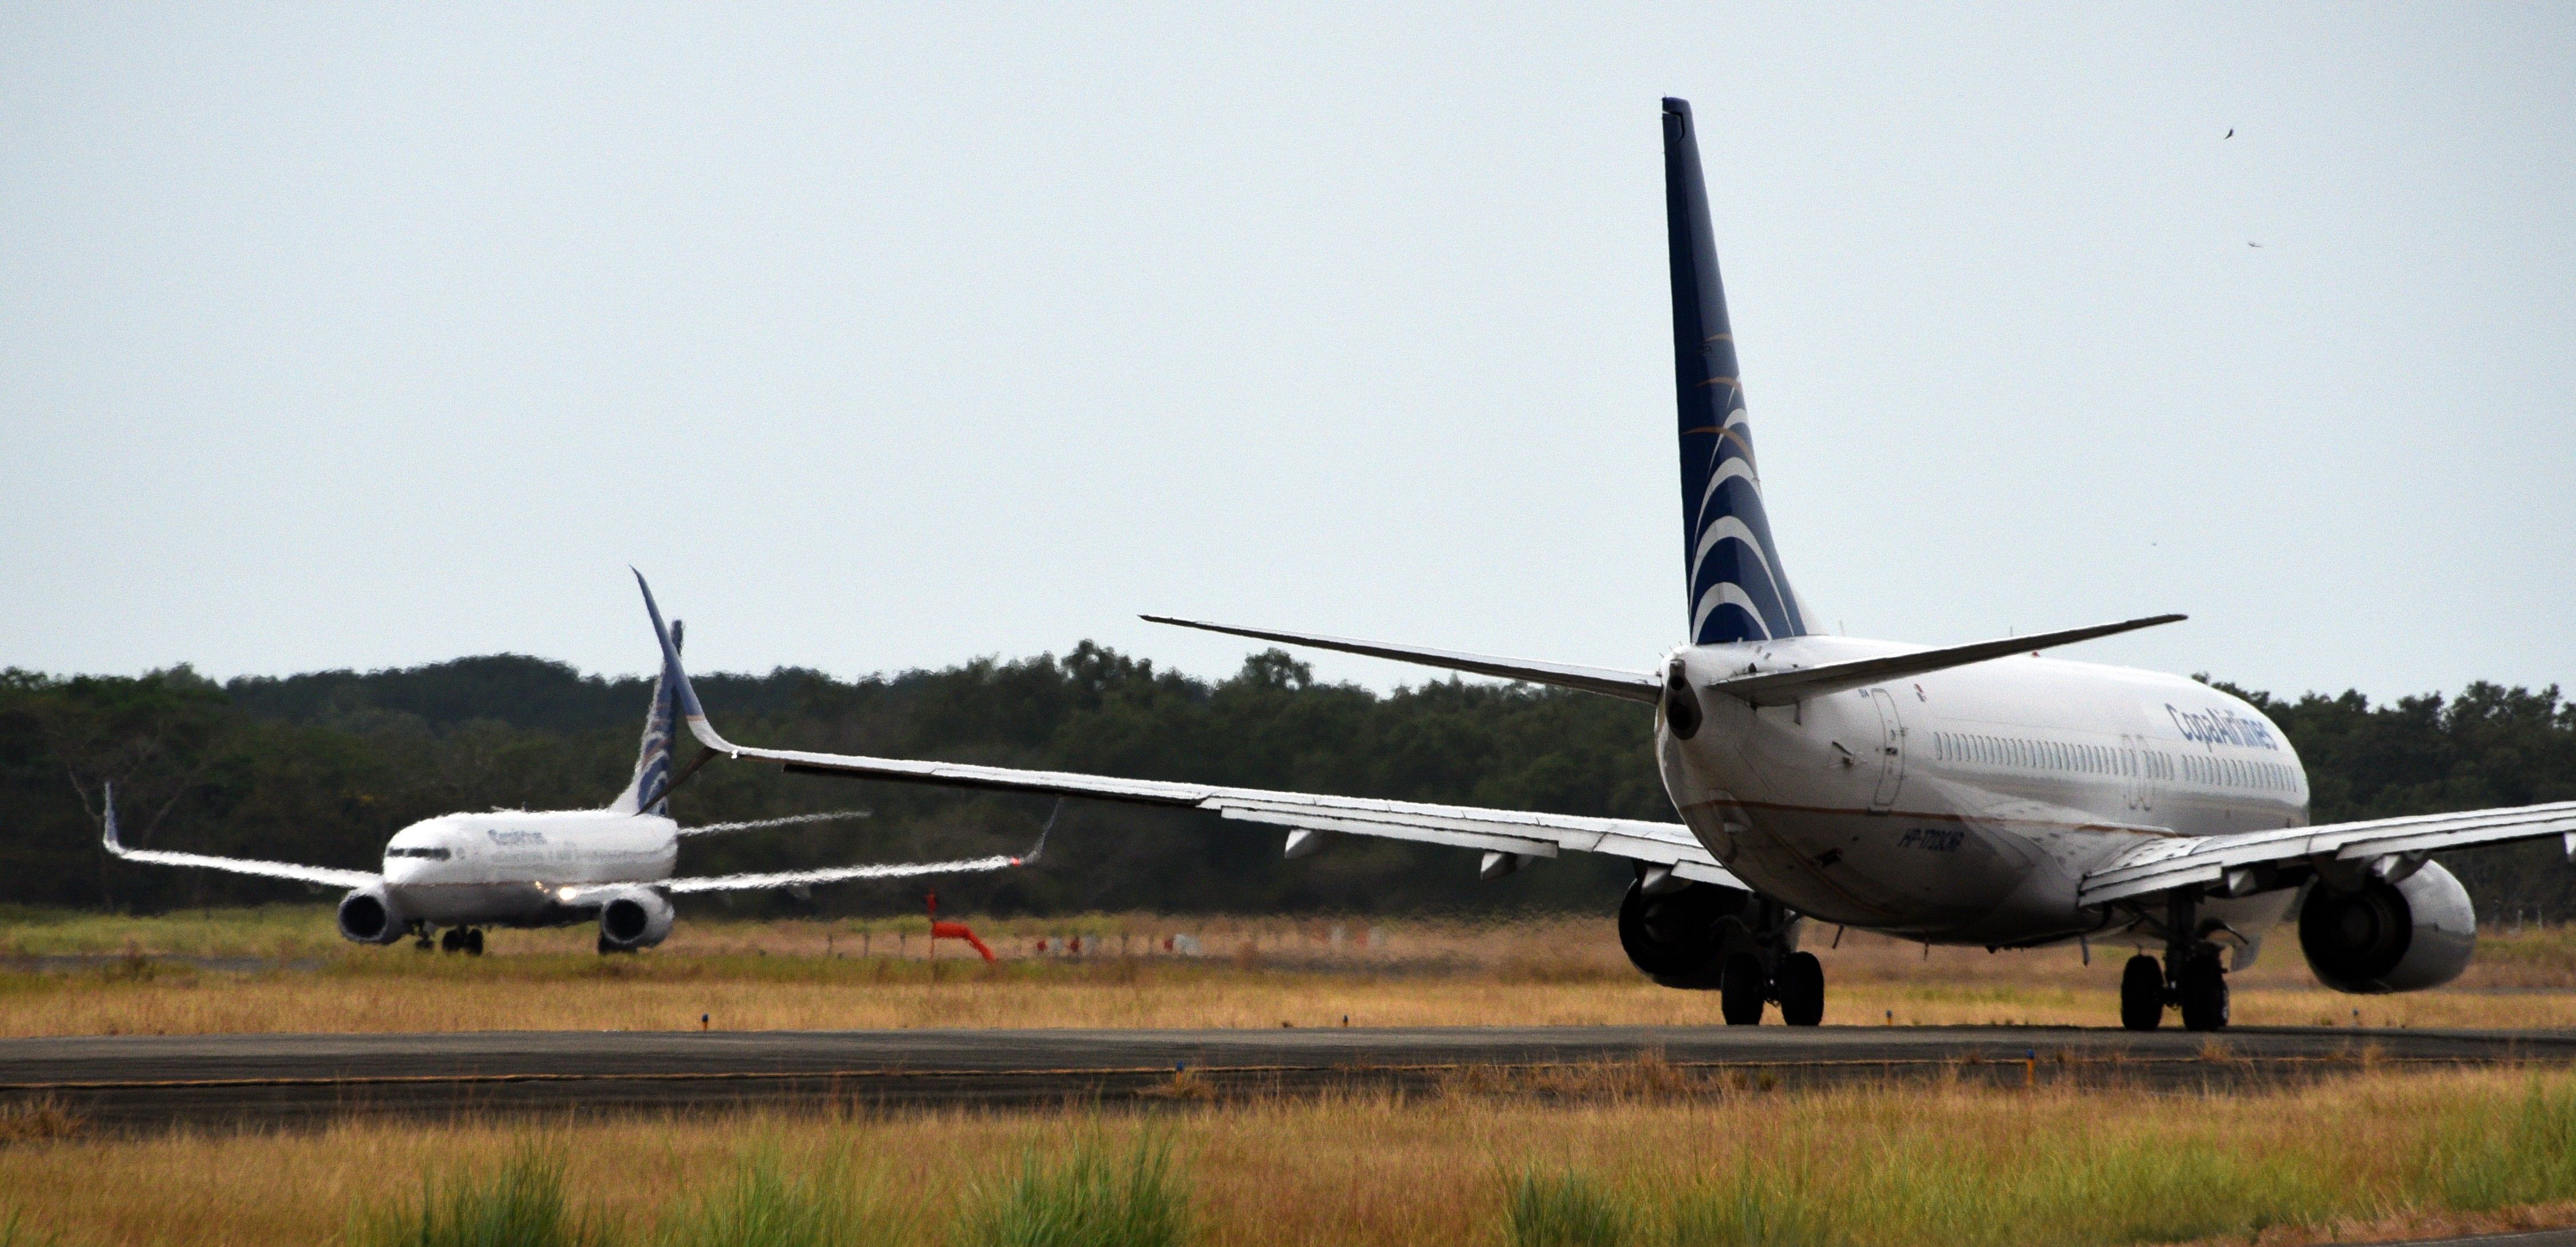 Two Copa Airlines aircraft